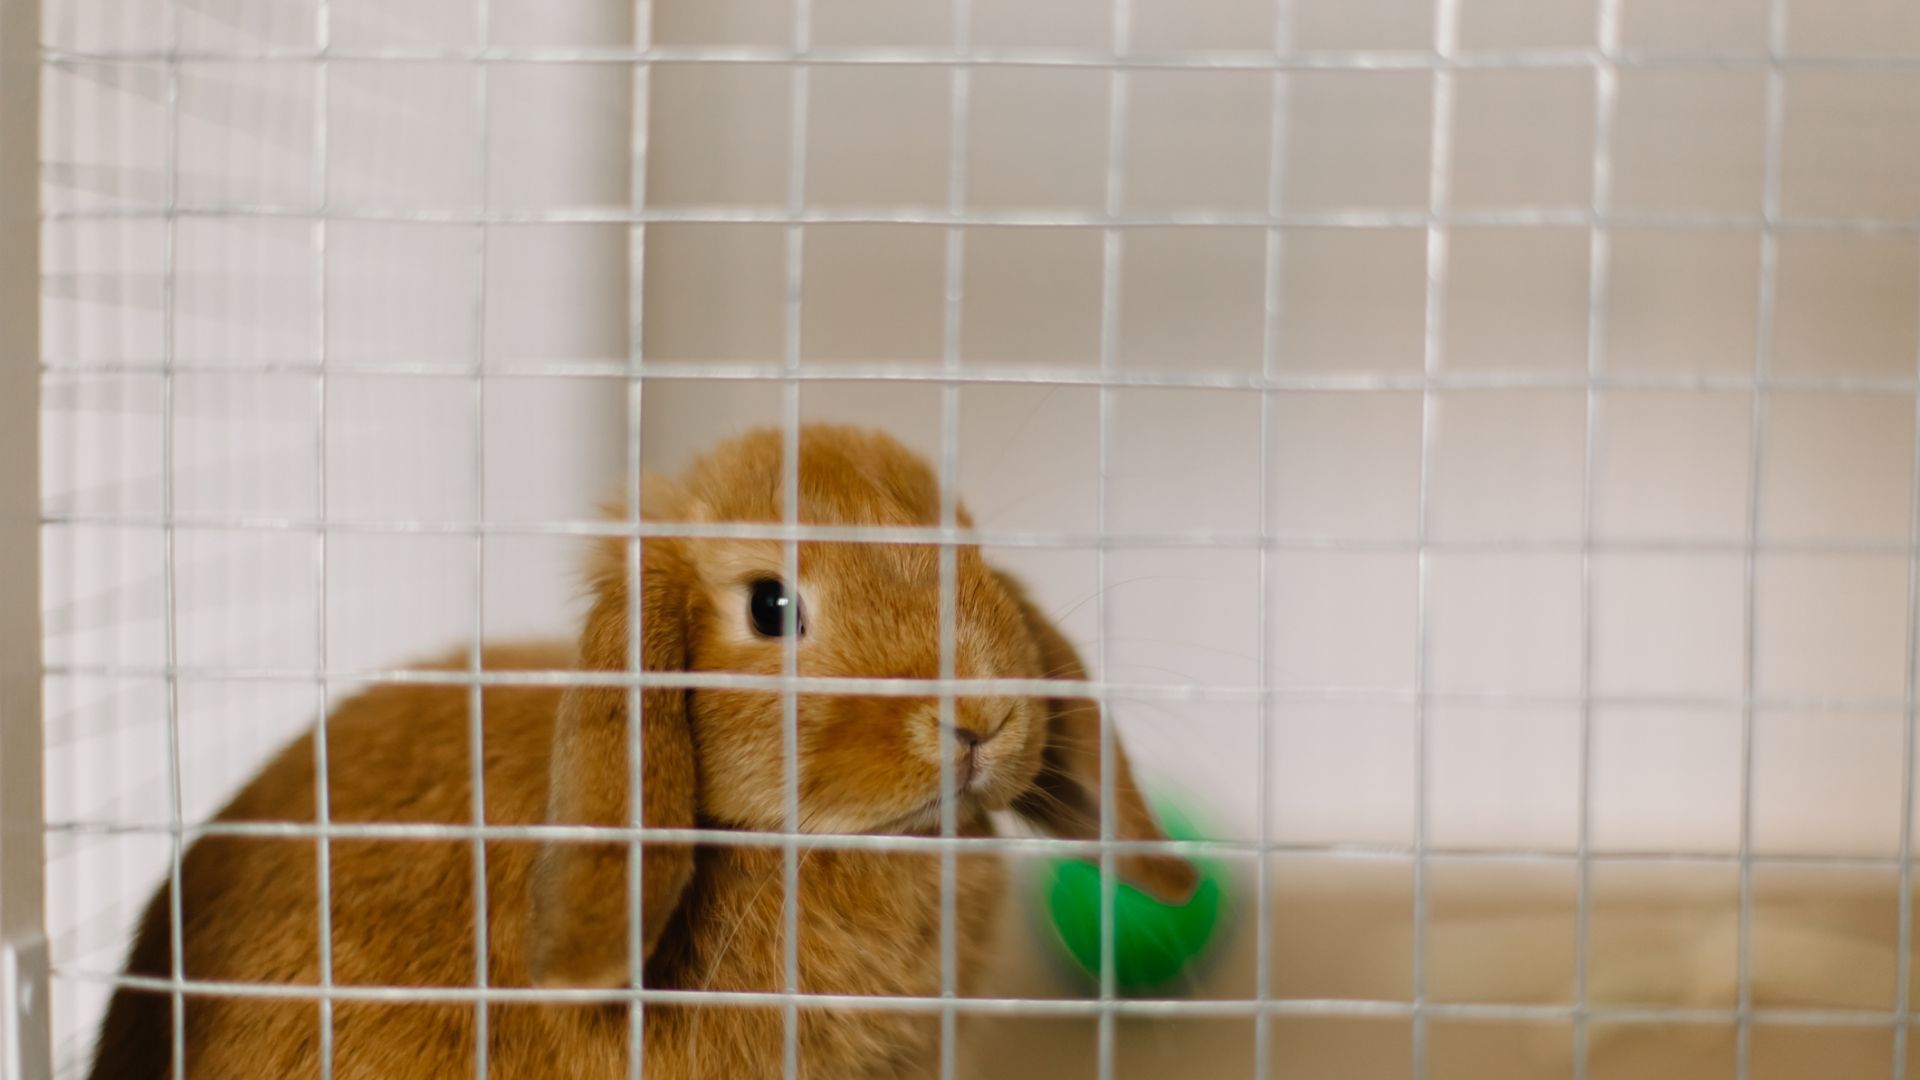 <p>                     You may have noticed when you clean your rabbits out, they like to toss the dustpan and brush around or try to move their litter trays. Rabbits like to throw toys around and so providing your rabbits with safe toys, which they cannot chew through and digestive small parts of, gives them lots of enrichment.                   </p>